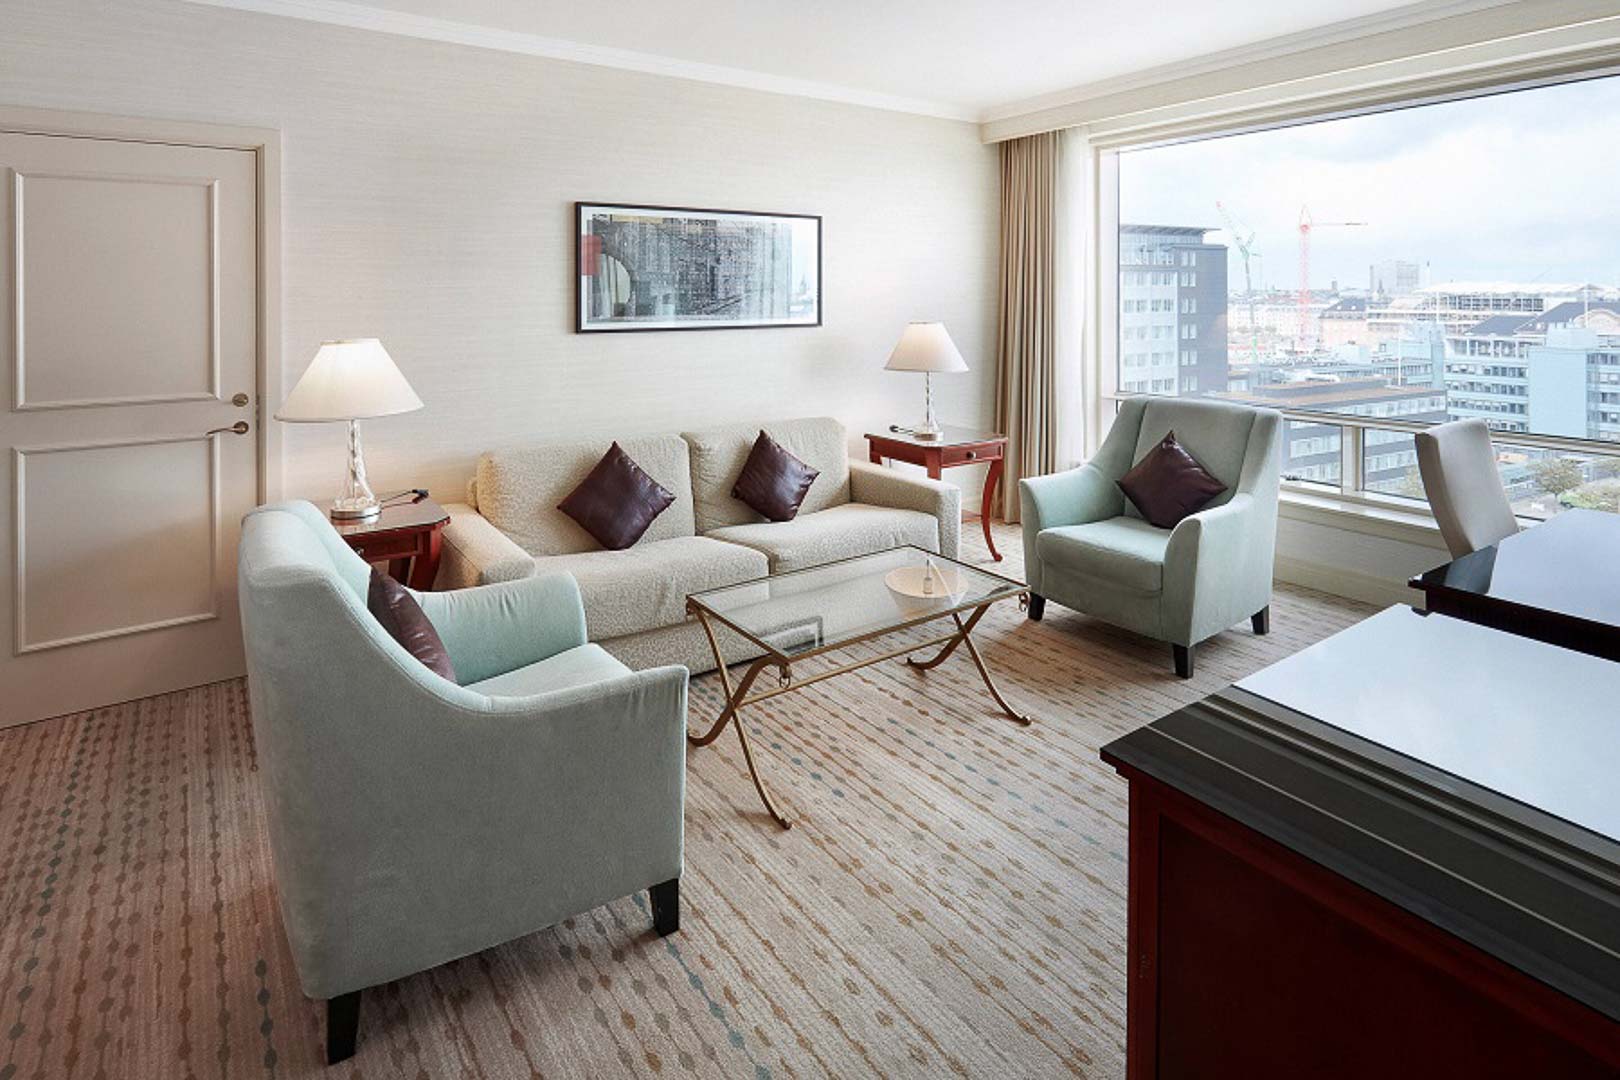 Example of a Suite, Marriott Hotel fitout and furniture, Brussels, Belgium